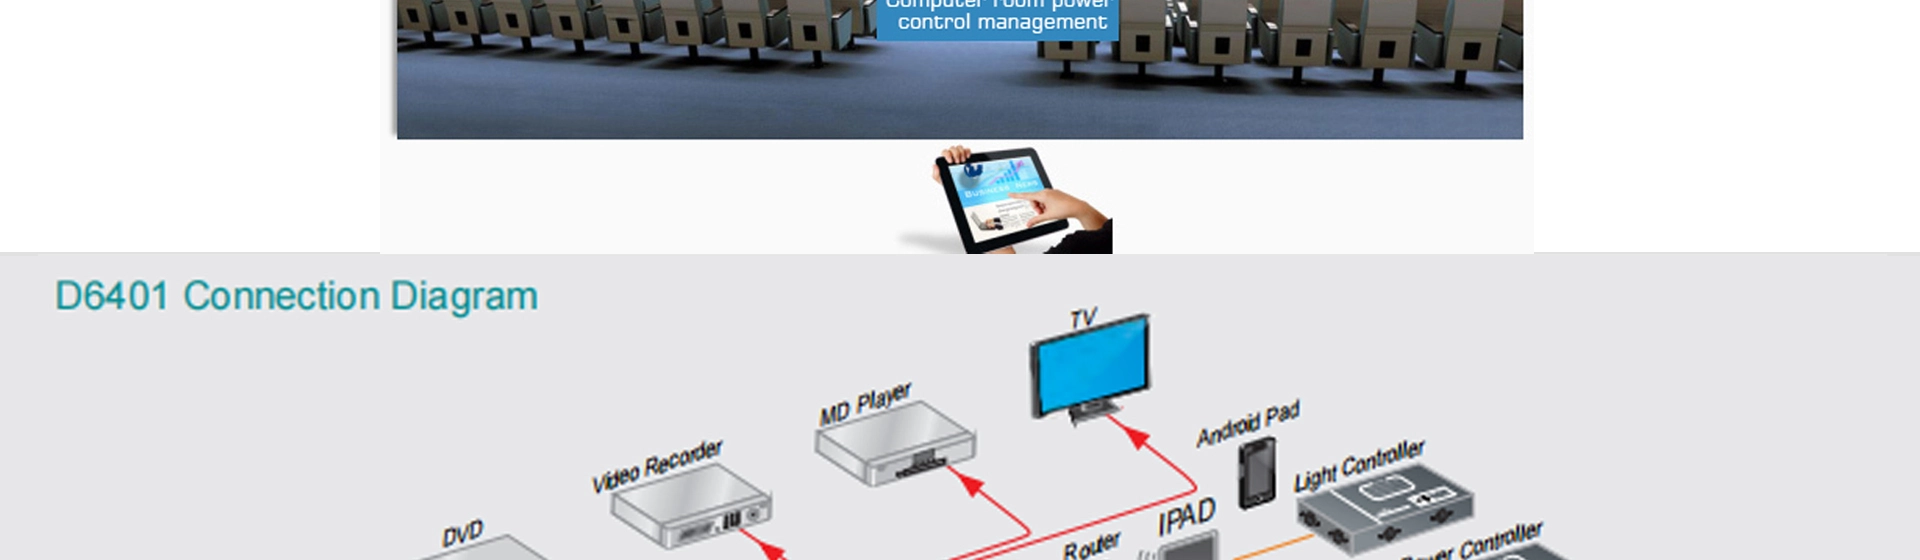 Integrated Multimedia Central Control Host